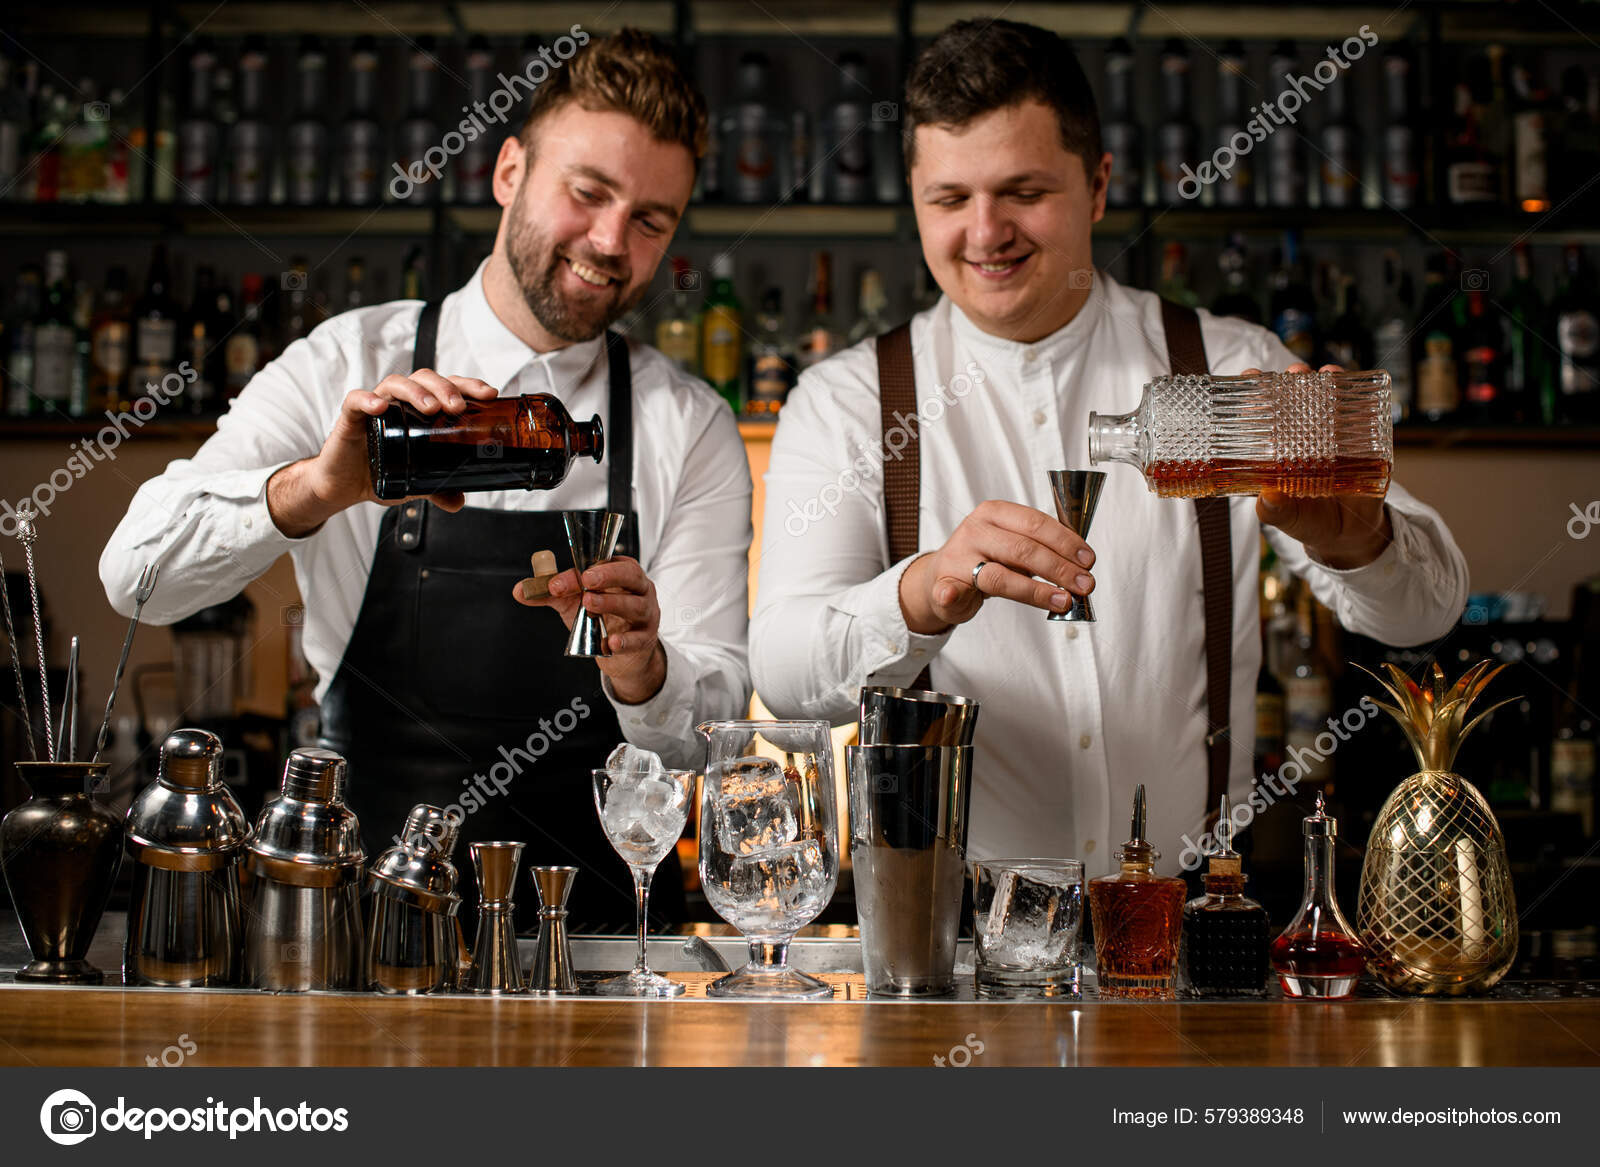 https://st.depositphotos.com/4079177/57938/i/1600/depositphotos_579389348-stock-photo-two-cheerful-bartenders-pouring-drink.jpg